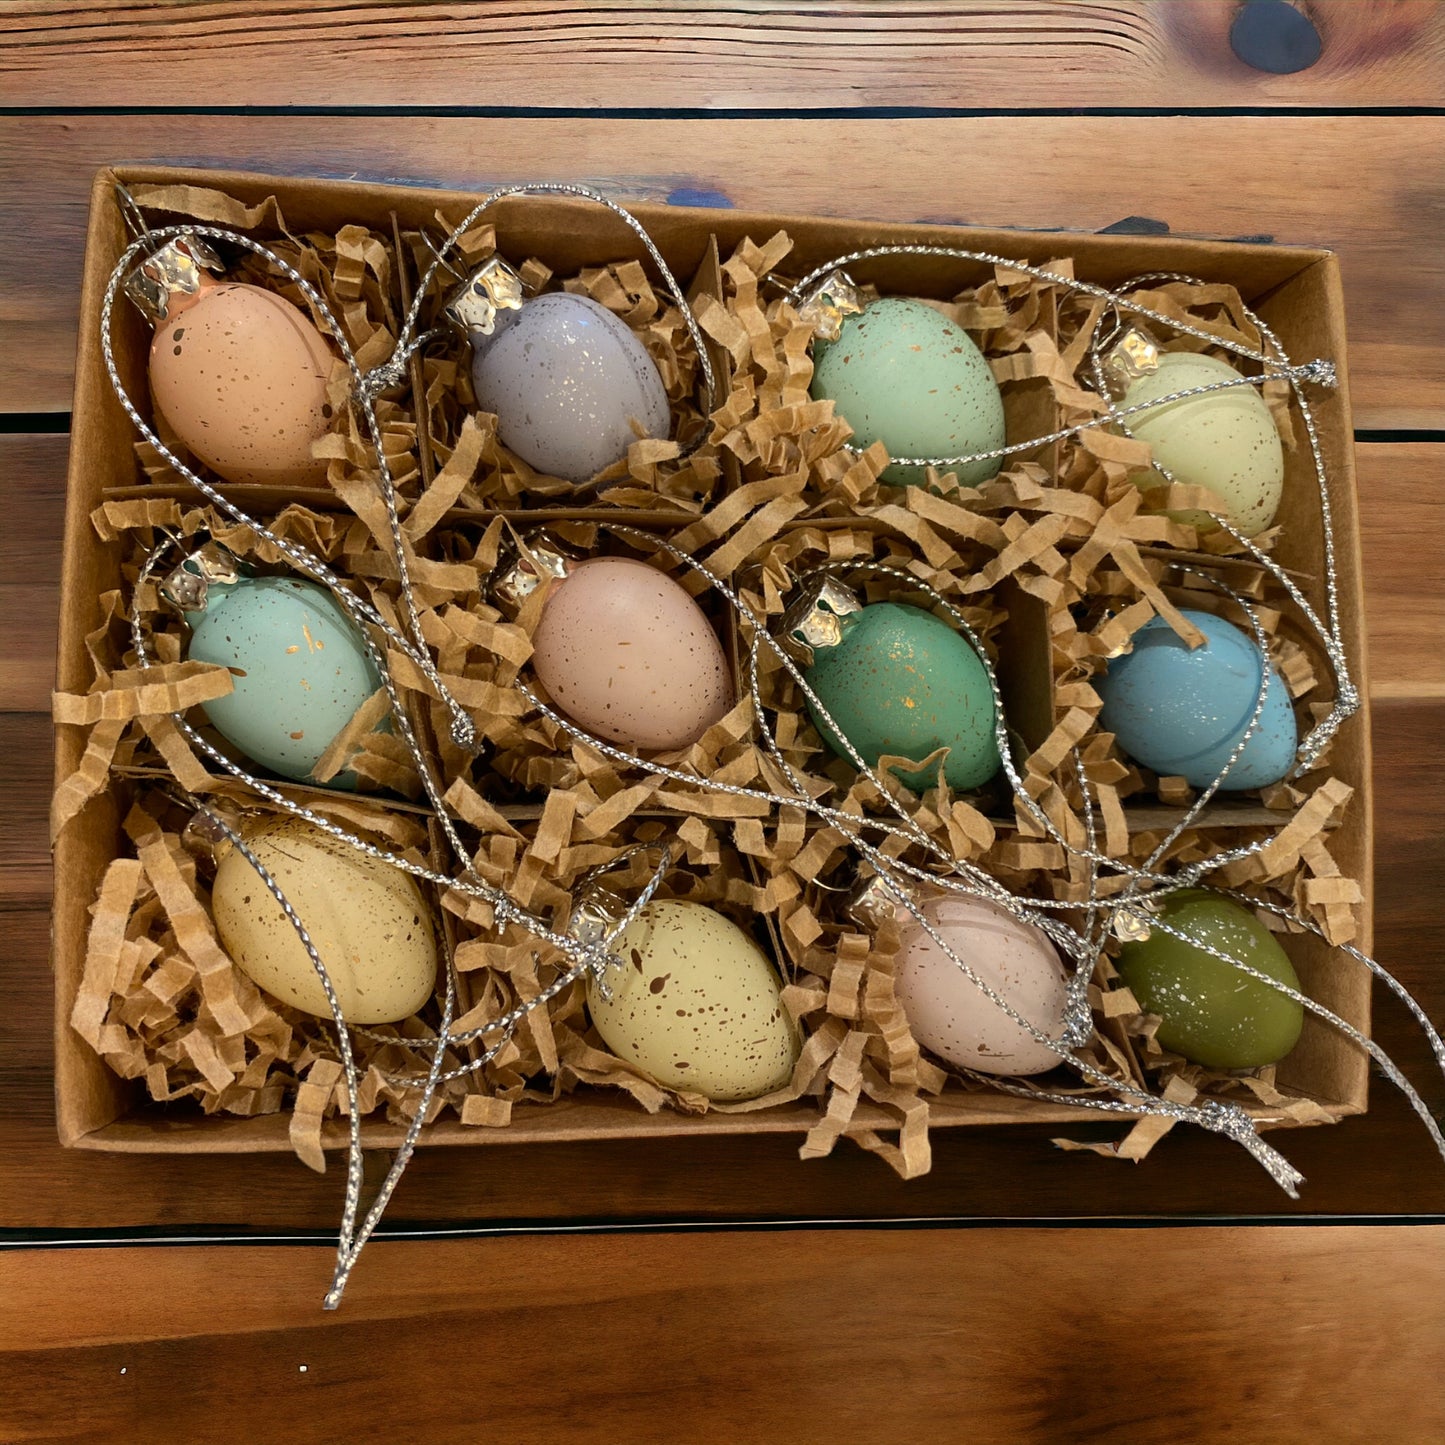 Set of 12 Enchanted Forest Eggs